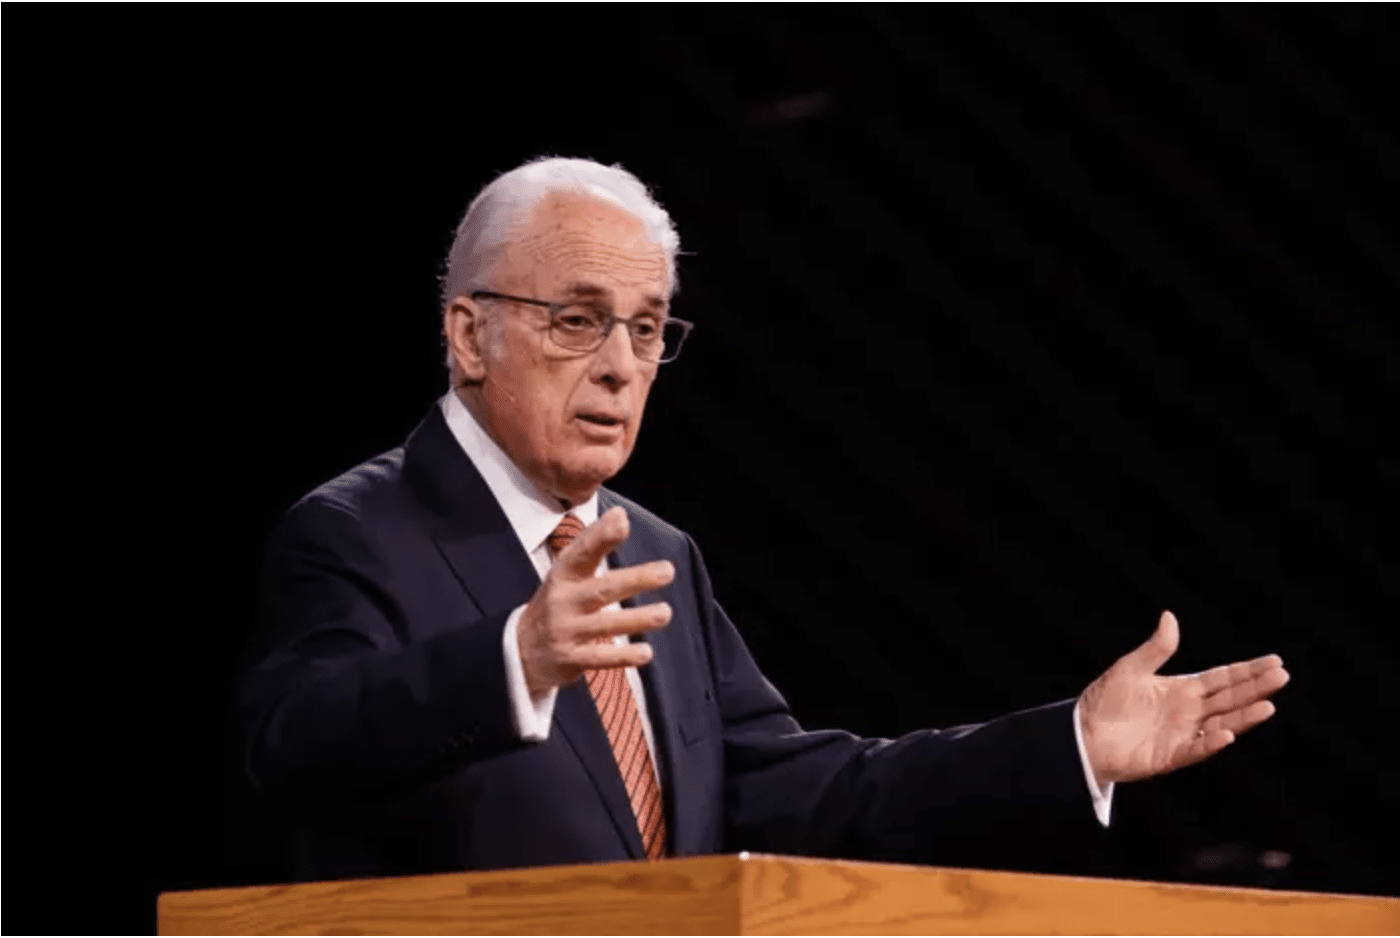 Pastor John MacArthur causes firestorm of reactions after saying there is no such thing as mental illness, calls PTSD ‘grief’